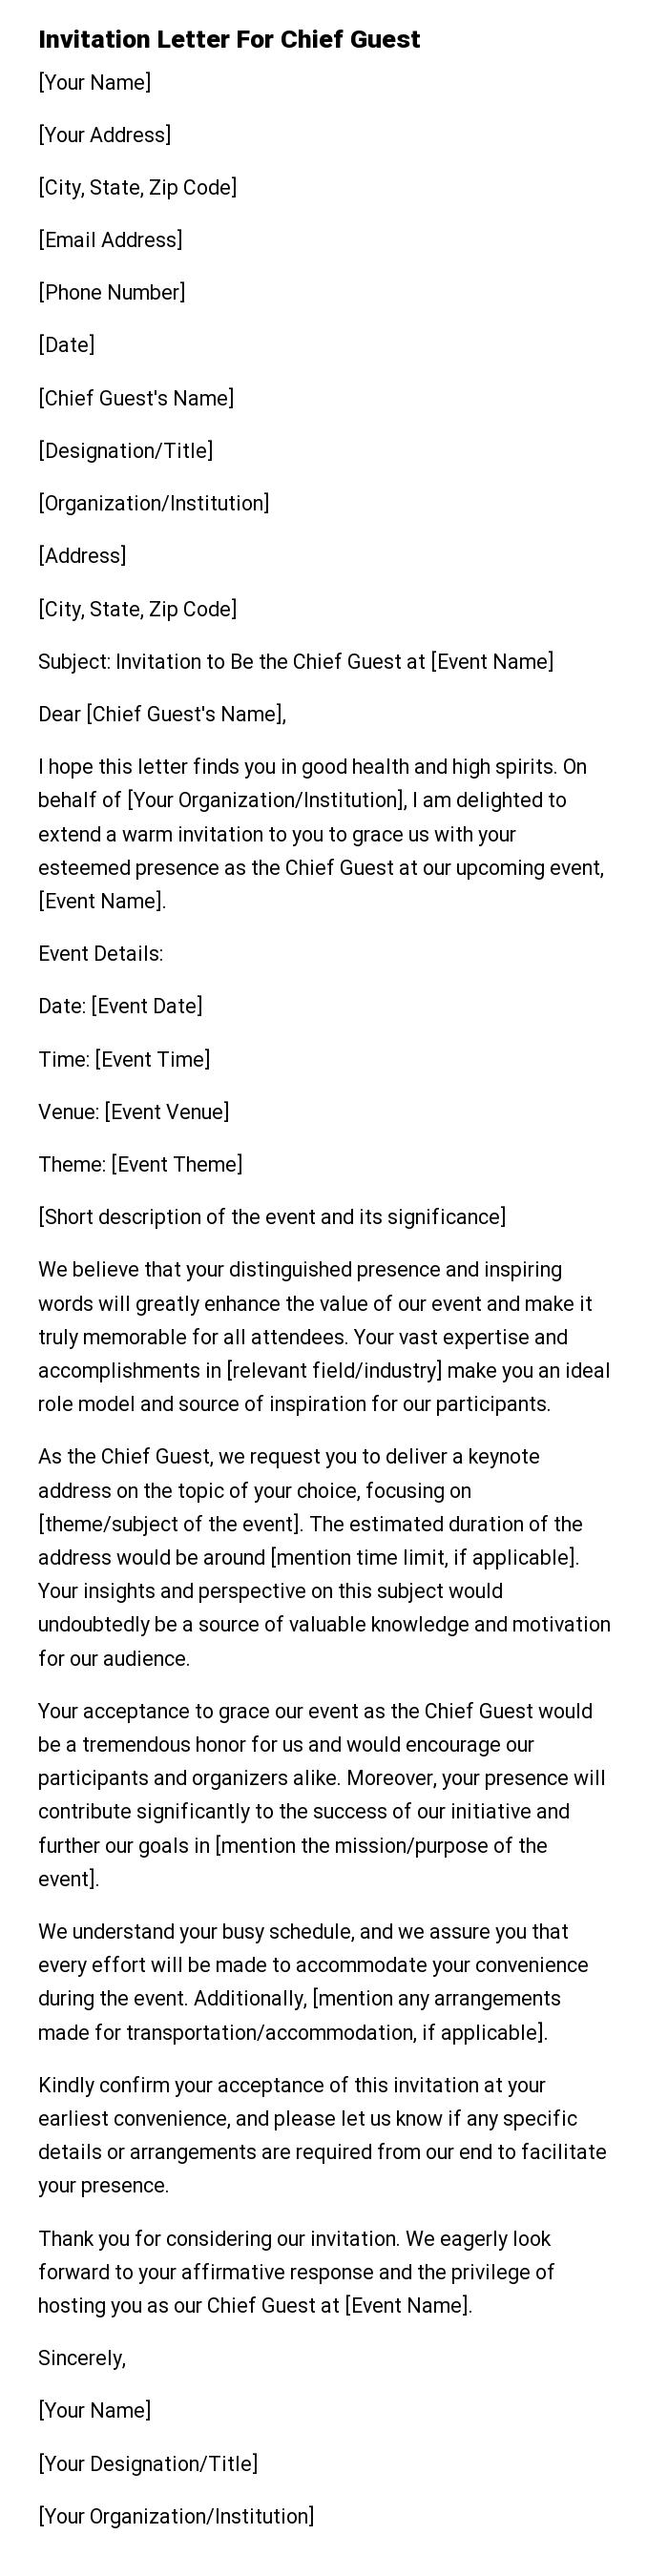 Invitation Letter For Chief Guest